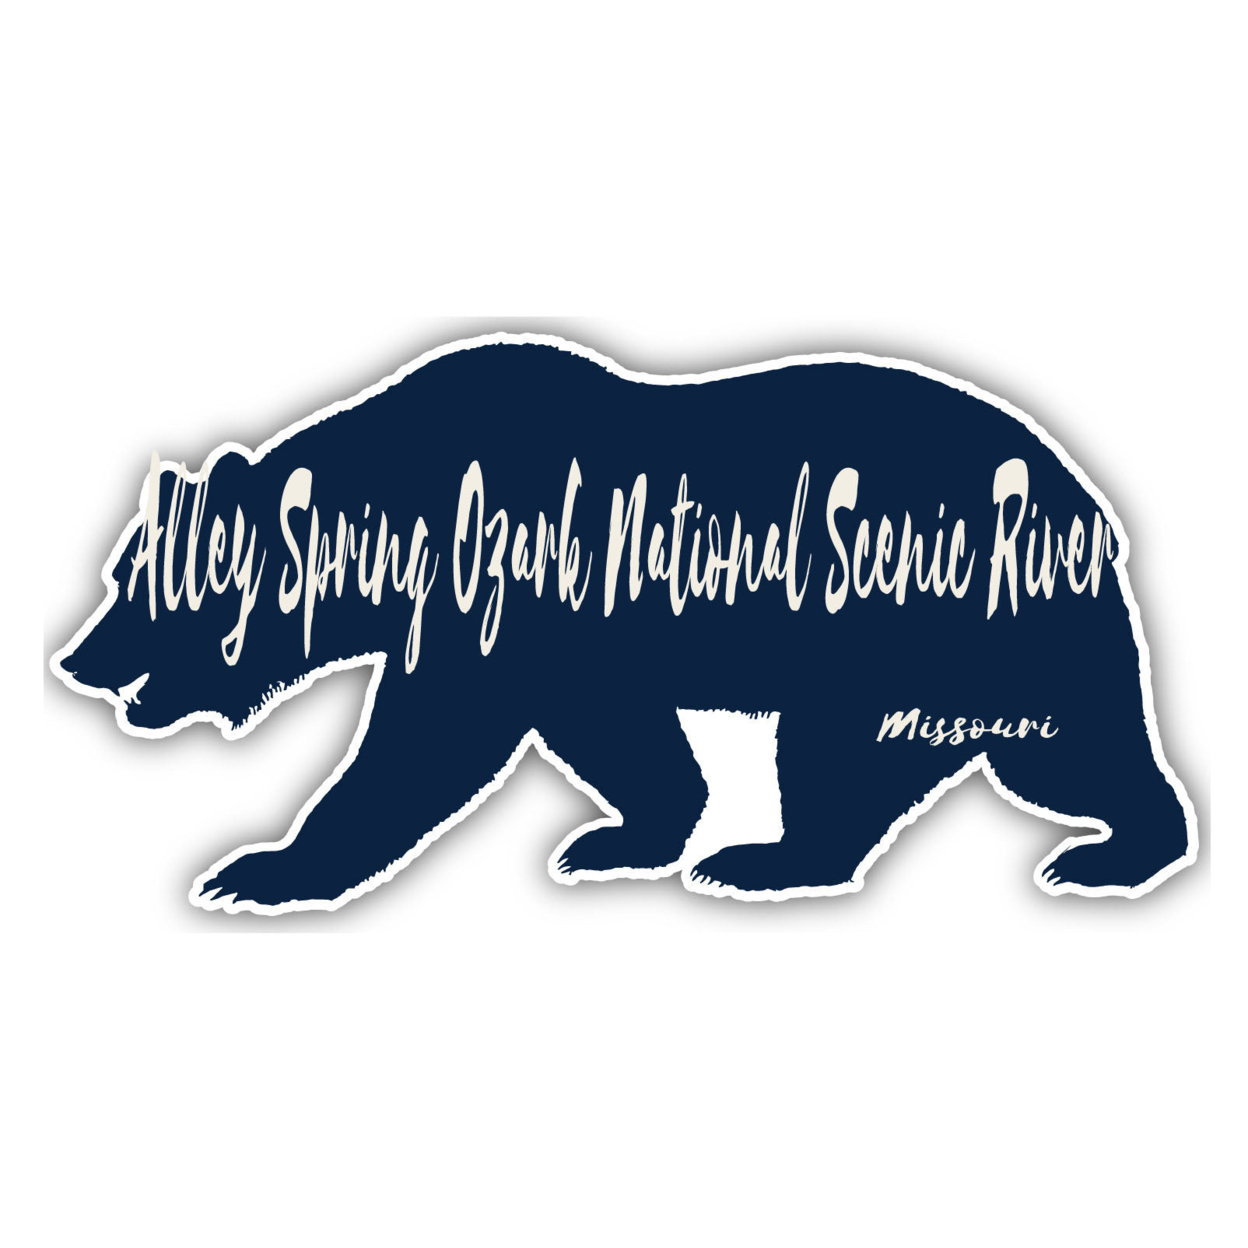 Alley Spring Ozark National Scenic River Missouri Souvenir Decorative Stickers (Choose Theme And Size) - 4-Pack, 6-Inch, Bear